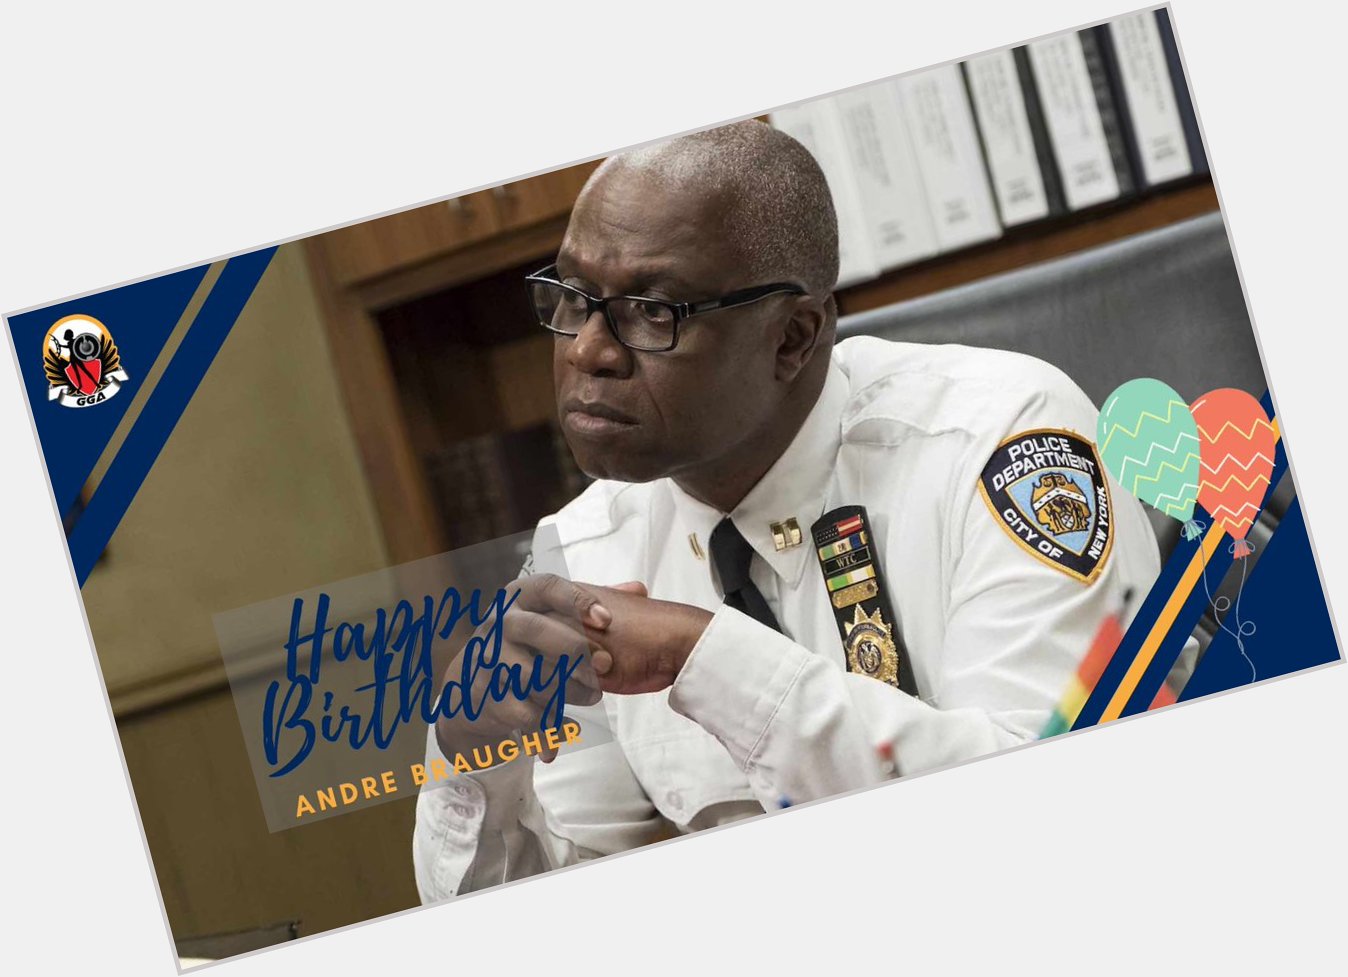 Happy Birthday to Andre Braugher, a.k.a. Deputy Commissioner Raymond Holt!  